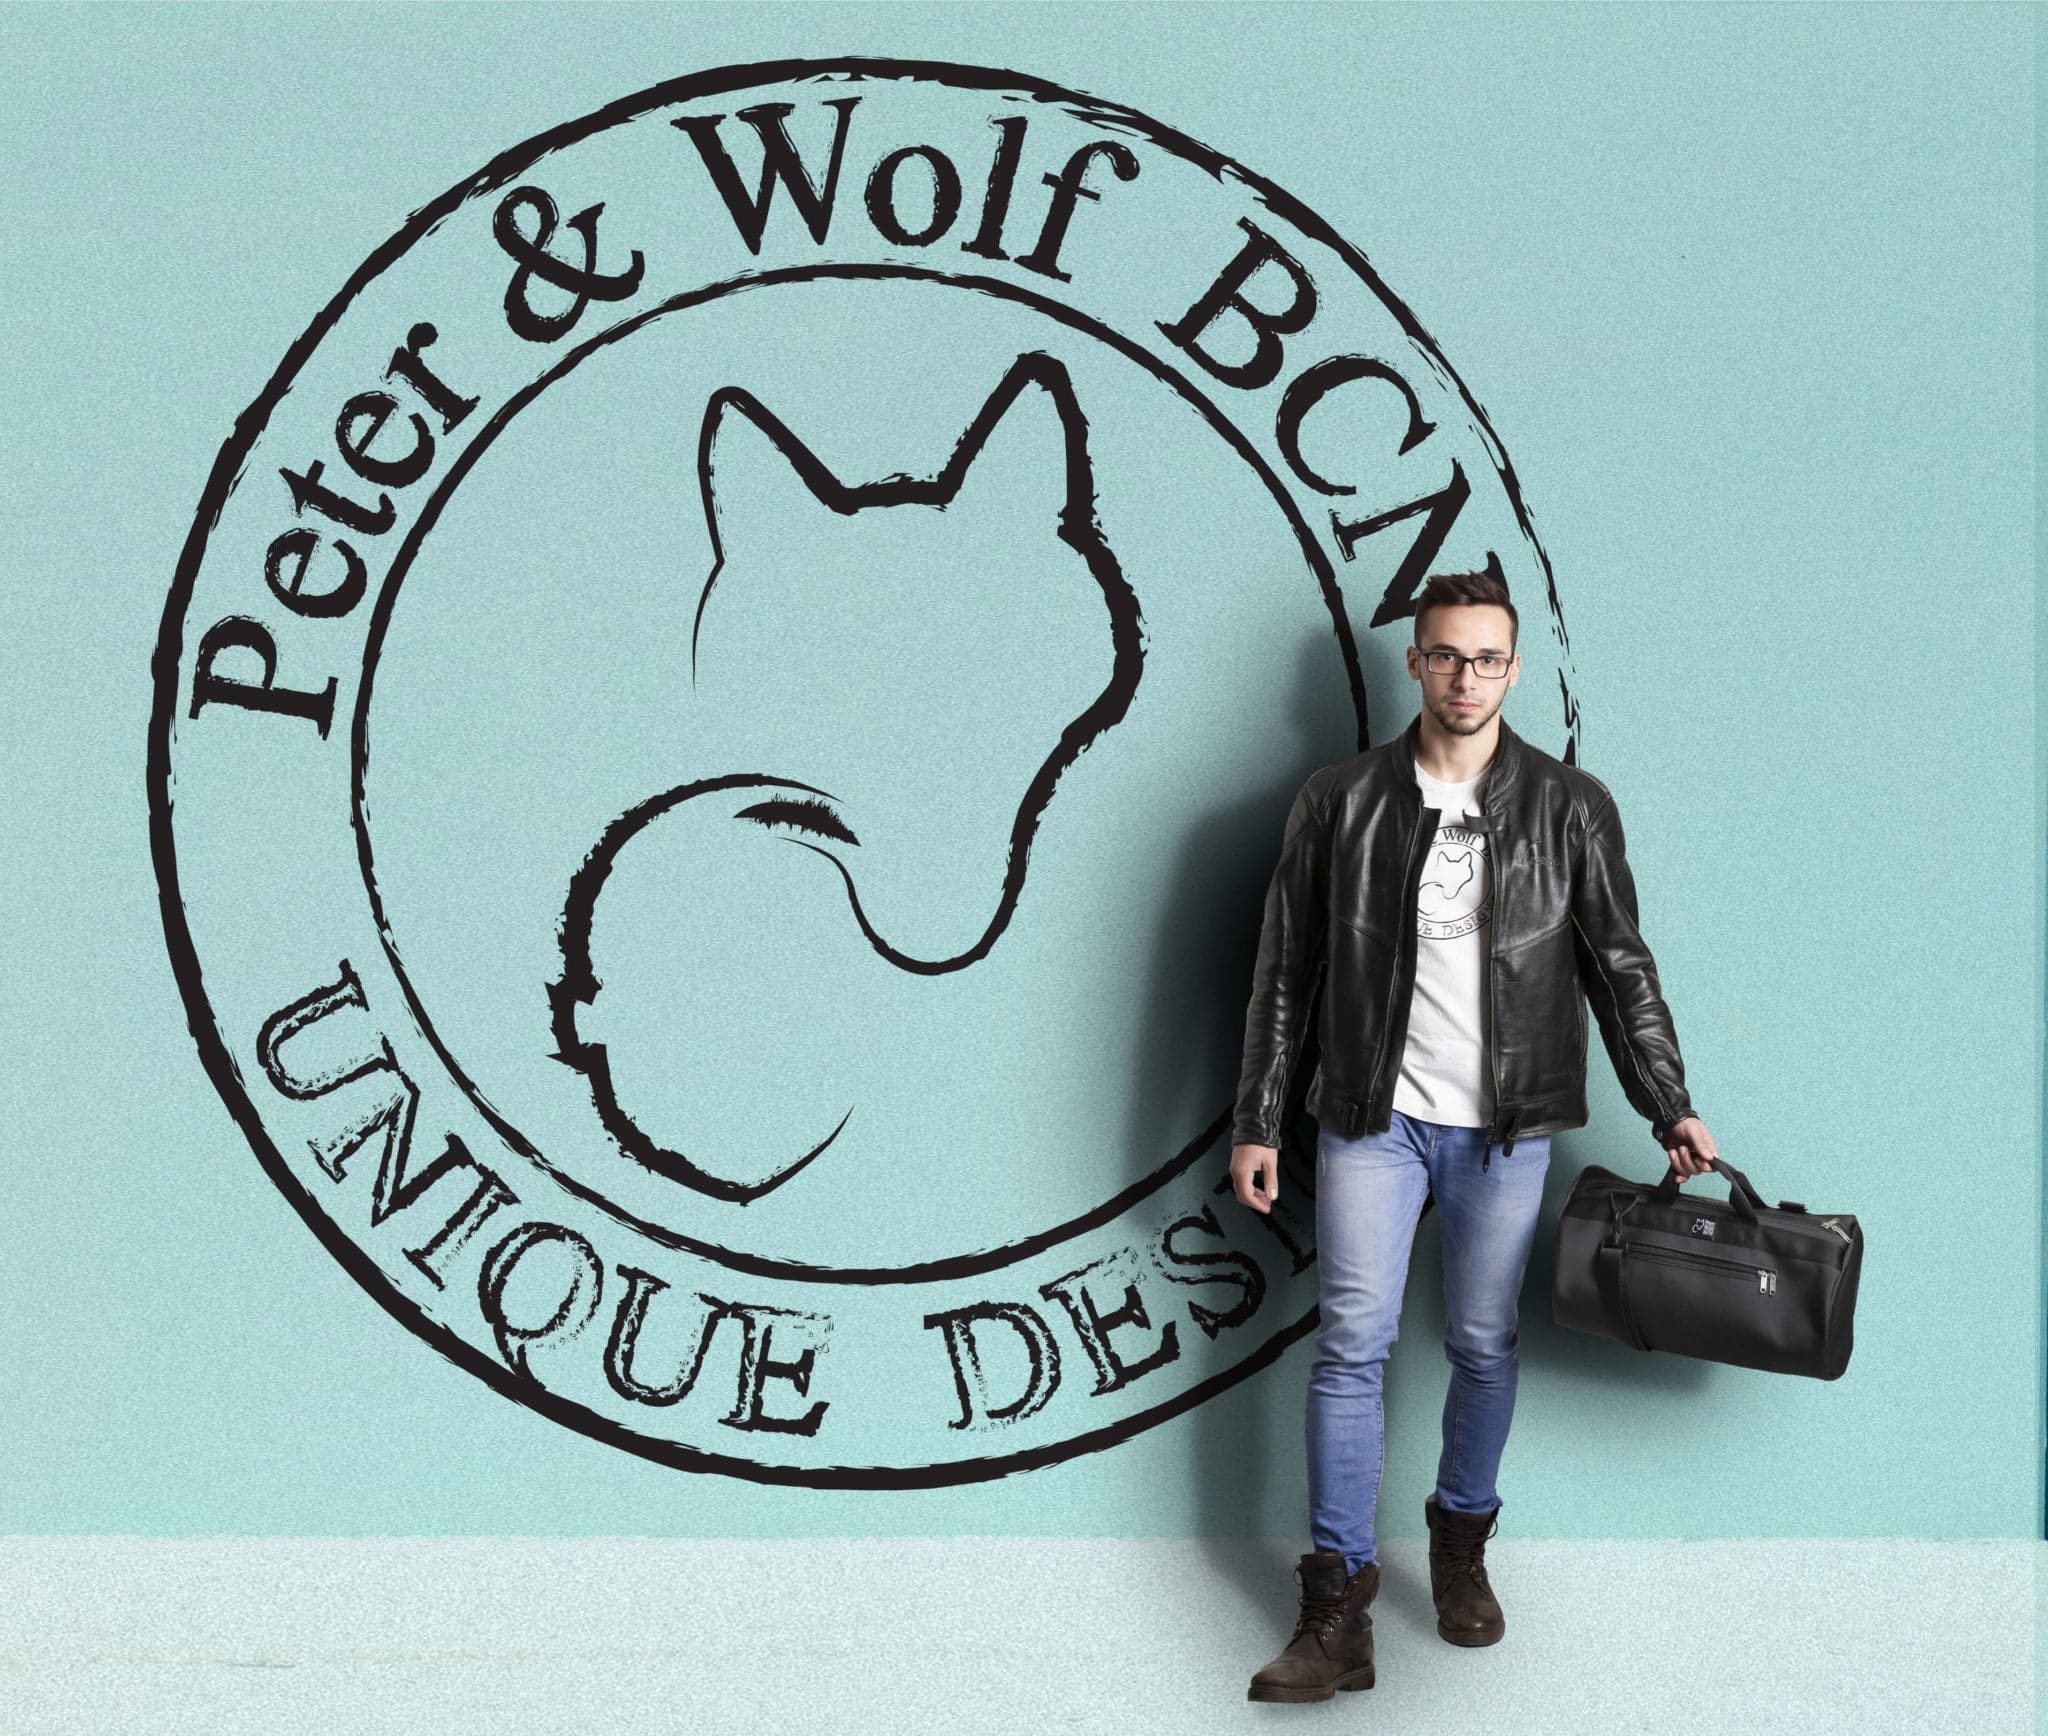 Peter and Wolf BCN